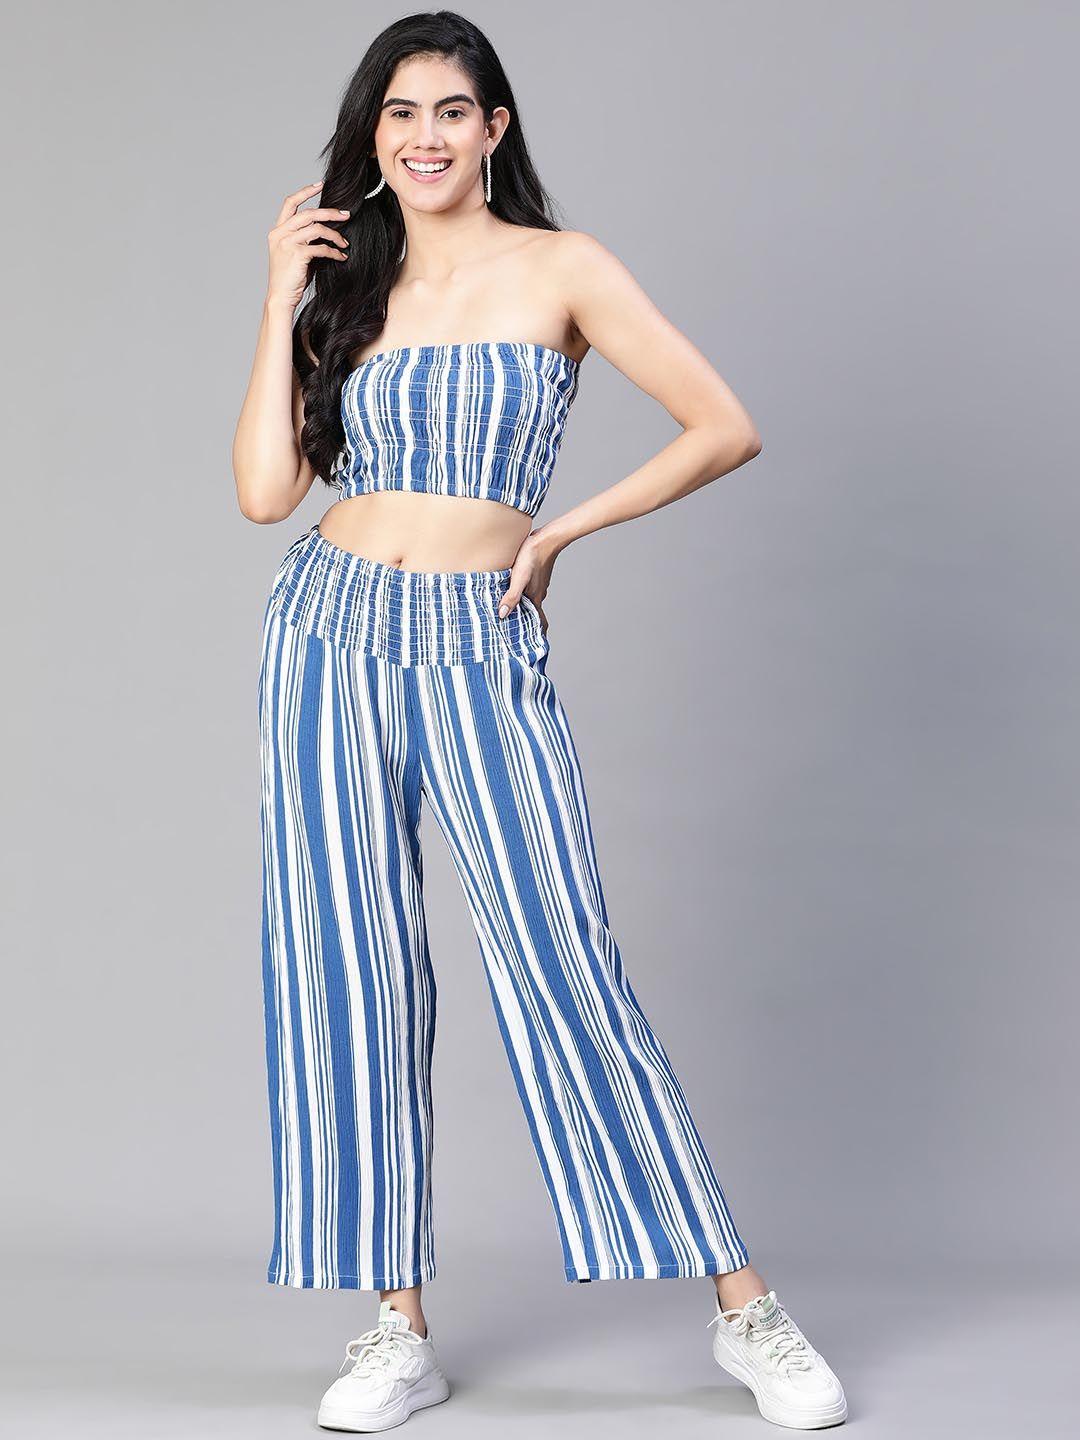 oxolloxo striped trousers with bustier crop top